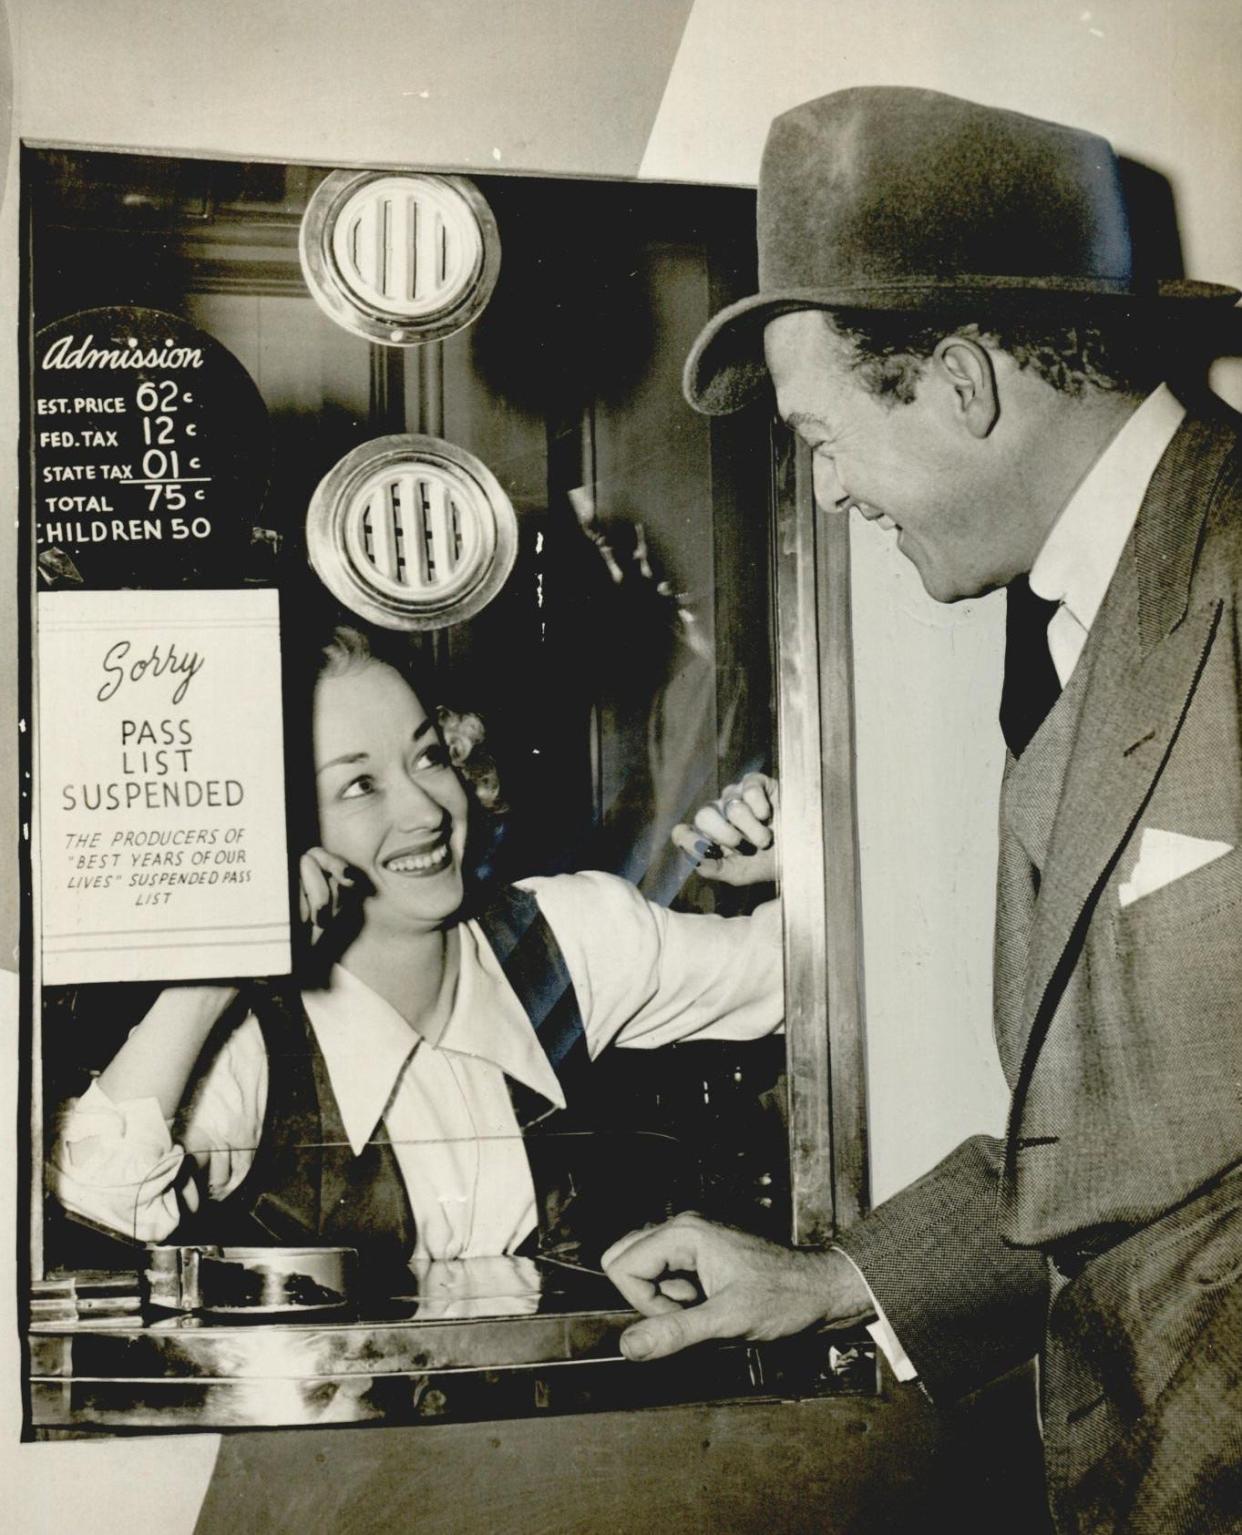 When Oklahoma born Hollywood actor Van Heflin sauntered up to an Oklahoma City theater, ticket taker Virginia Benbenuto was a little starstruck in April 1947. What might wow today's moviegoers, though, were the ticket prices: 75 cents for adults, 50 cents for children.